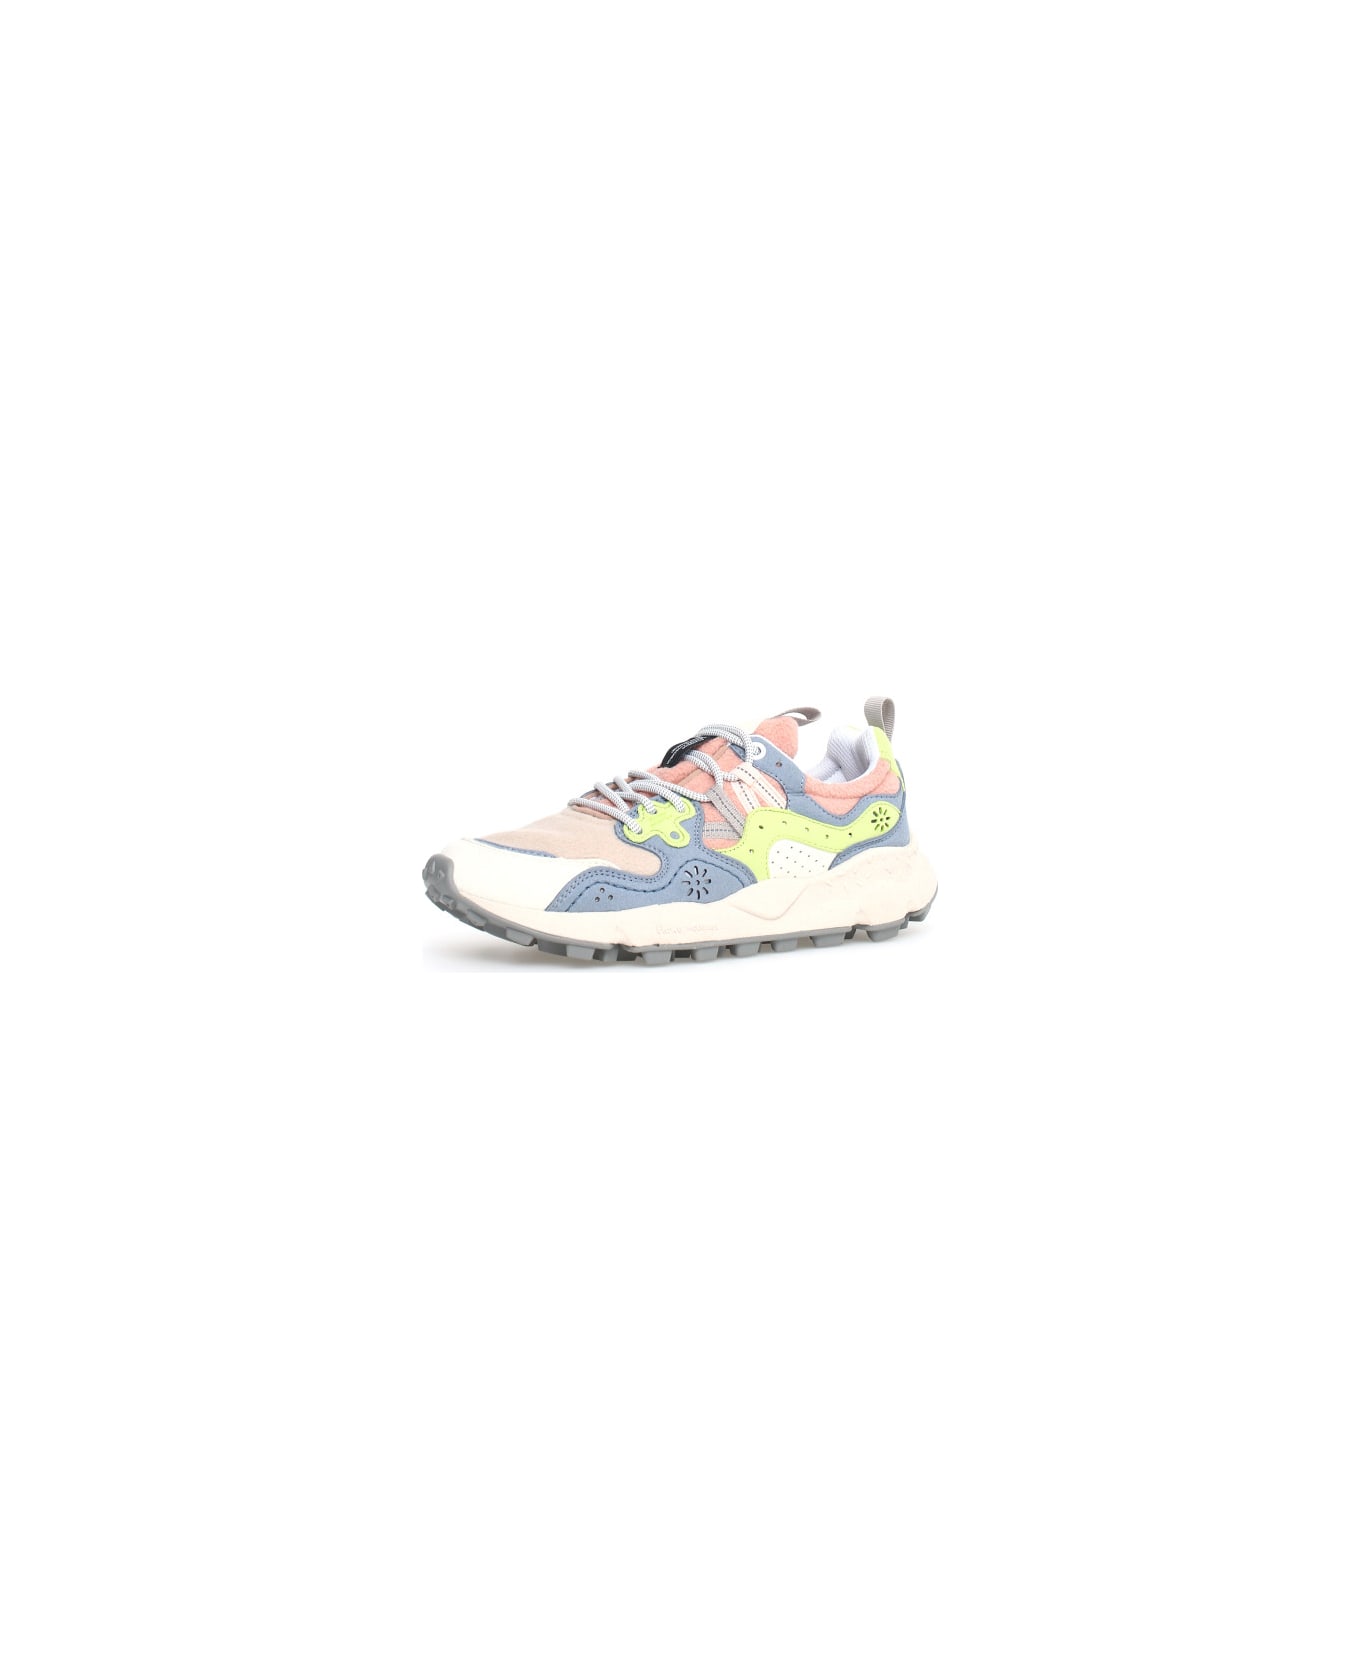 Flower Mountain Sneakers Yamano 3 - Multicolor スニーカー